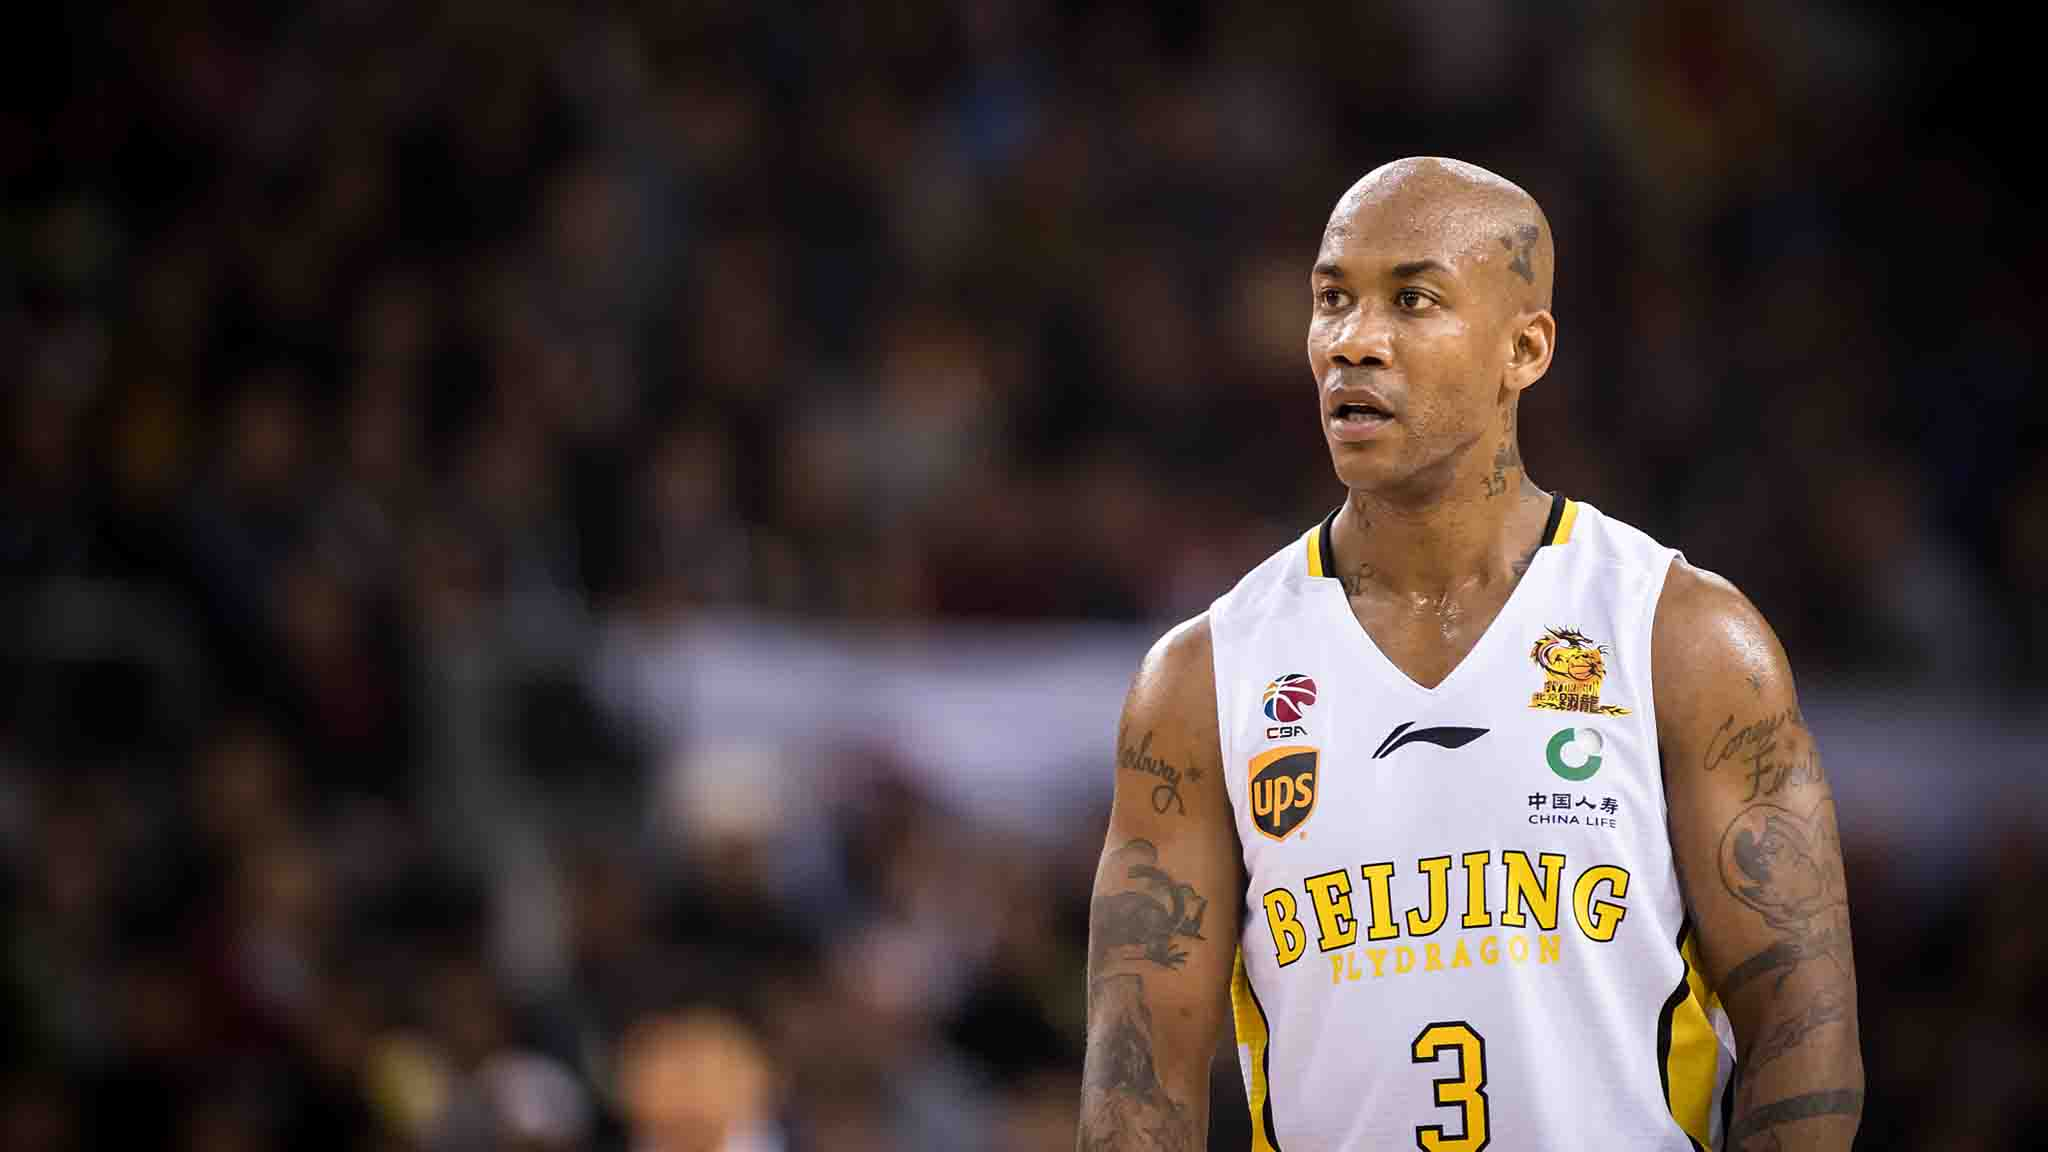 Stephon Marbury: Fight for love